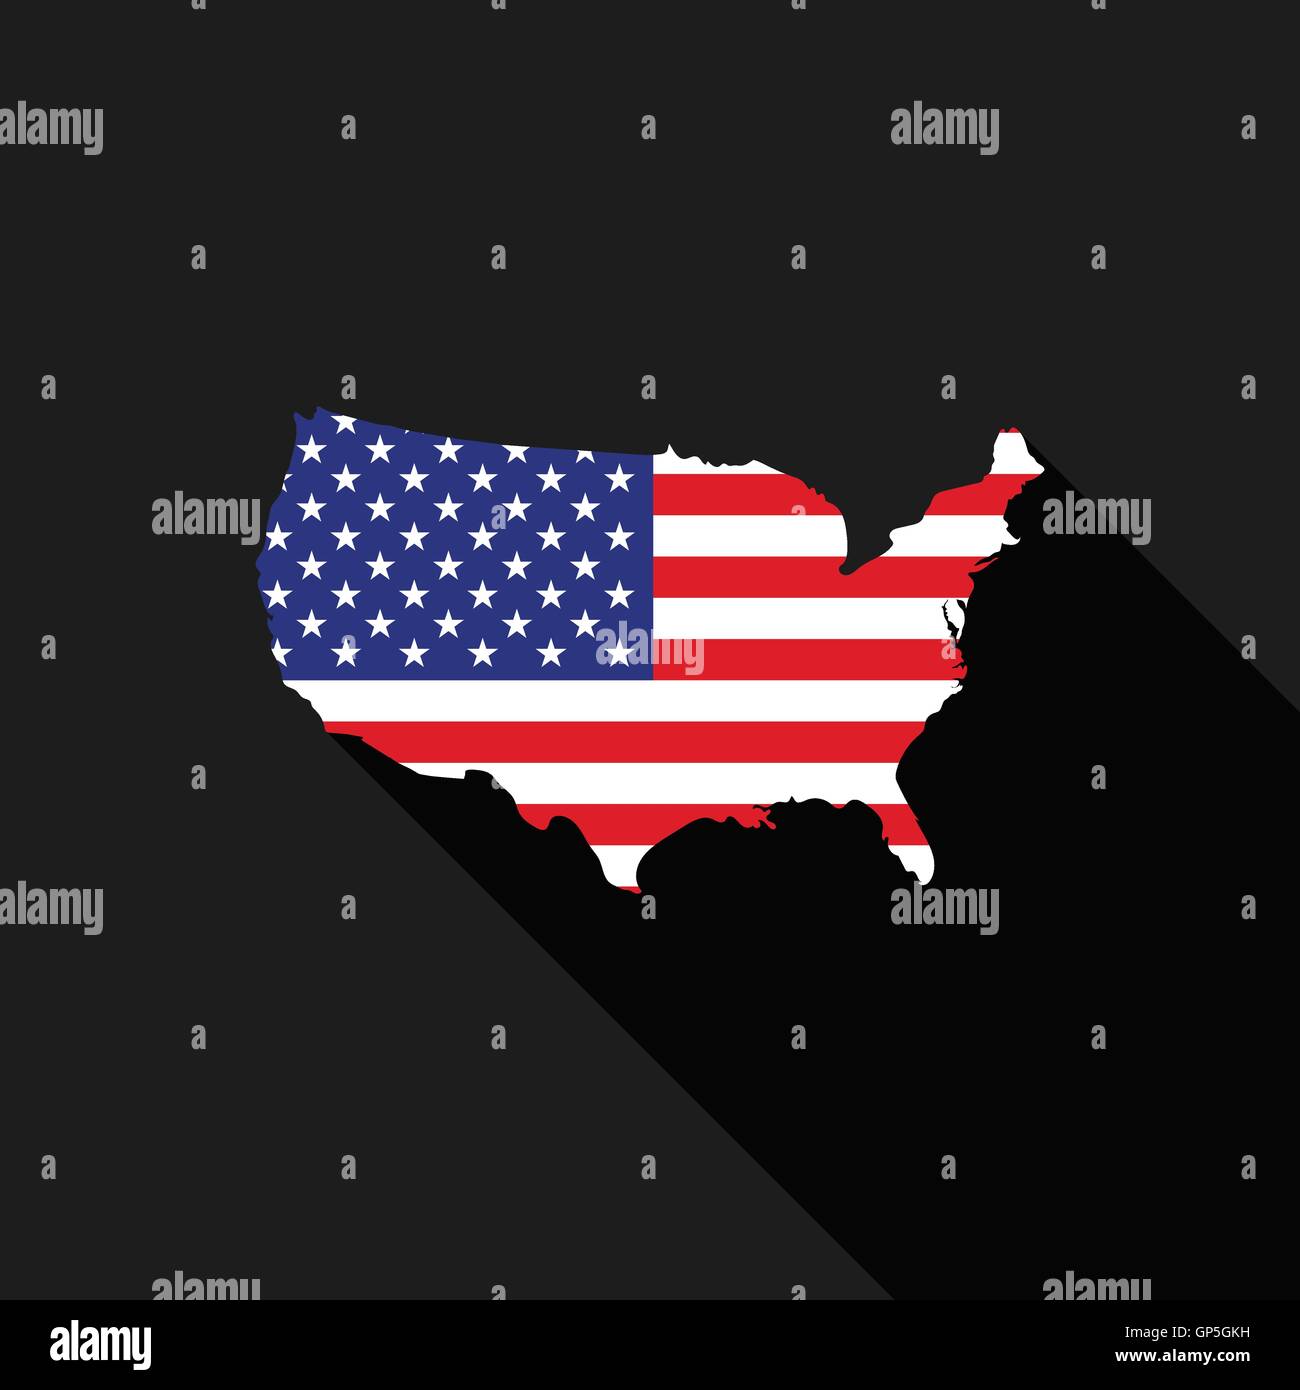 USA, America, flag map flat design, icon symbol isolated, long shadow, vector illustration Stock Vector